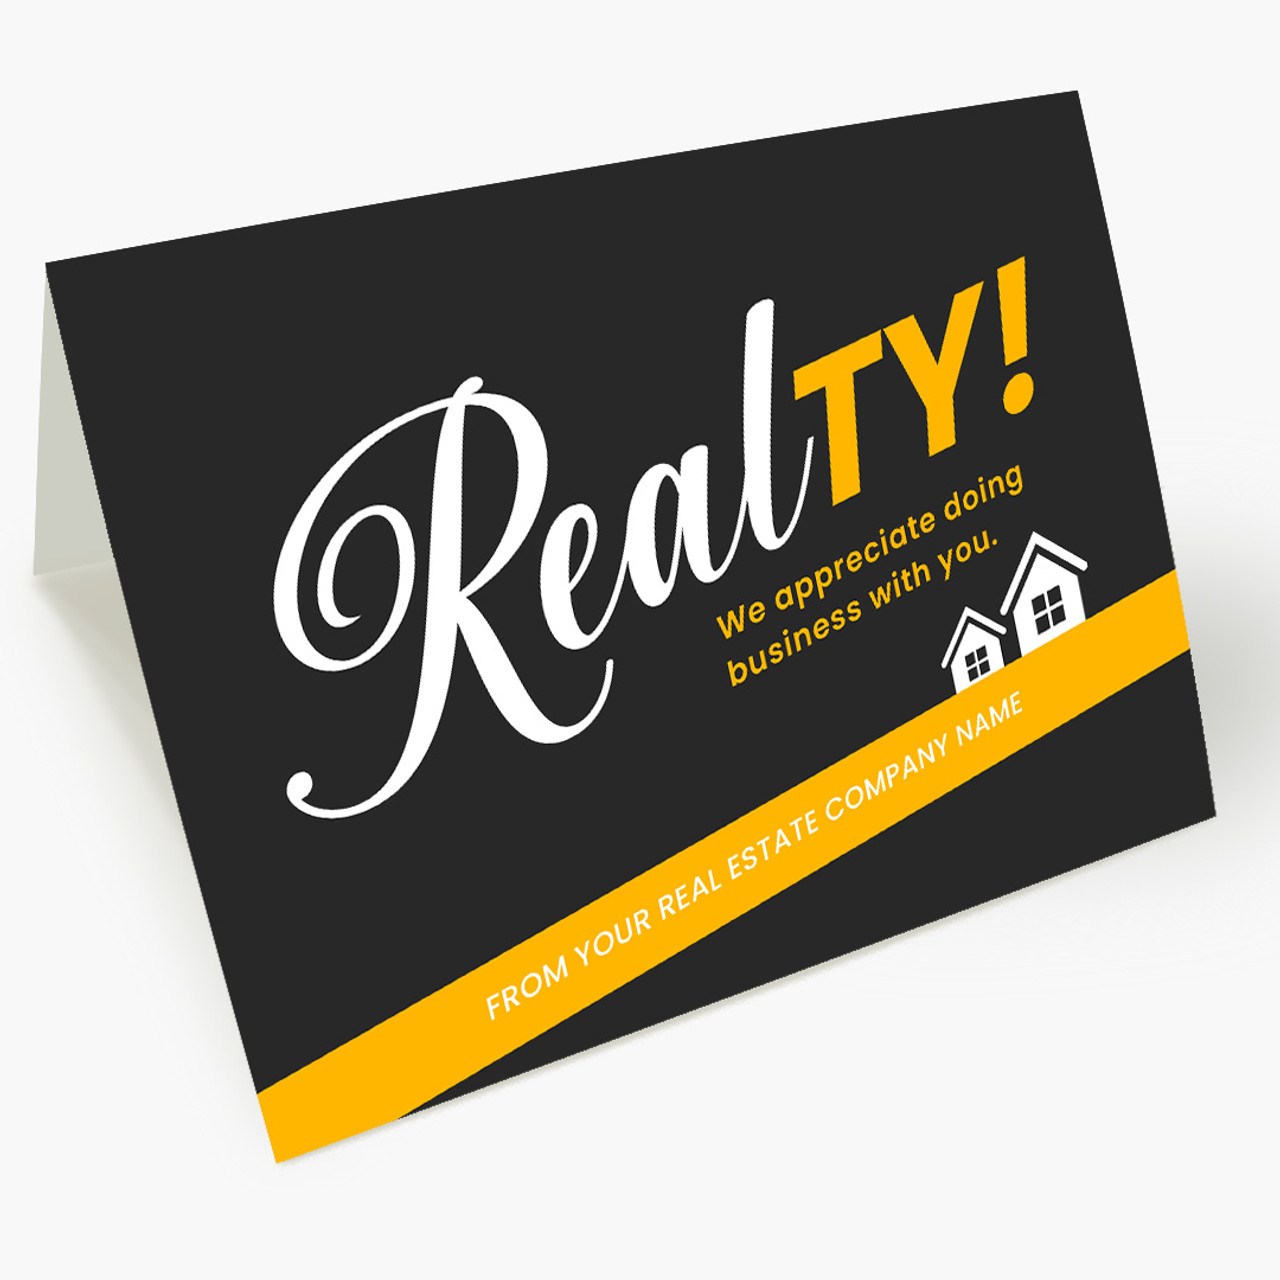 RealTY Yellow Thank You Card